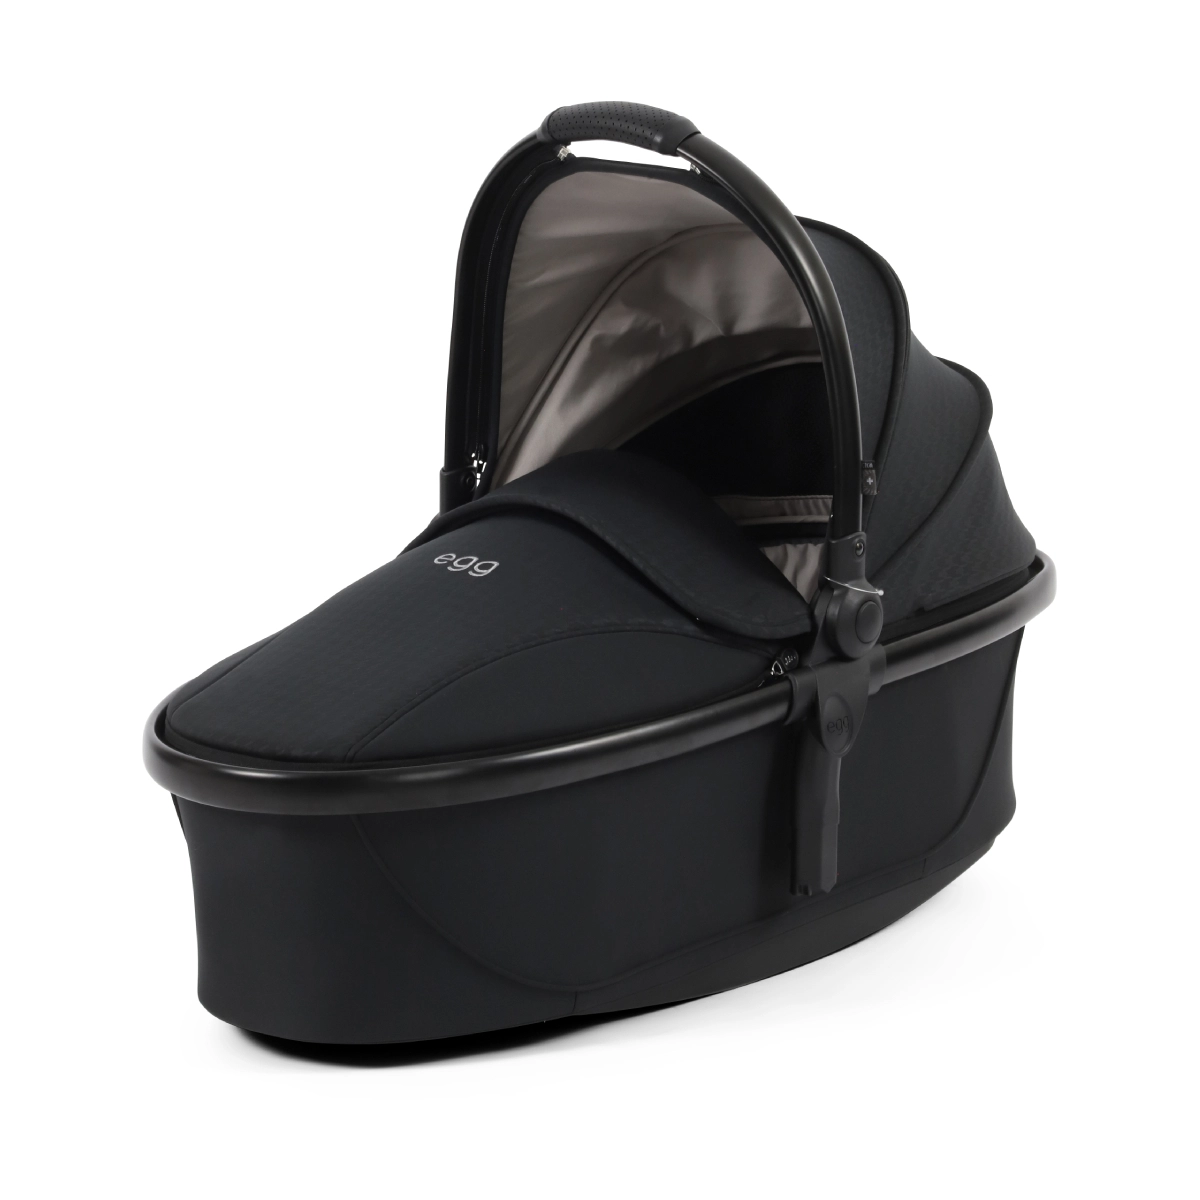 egg® 3 Special Edition Carrycot